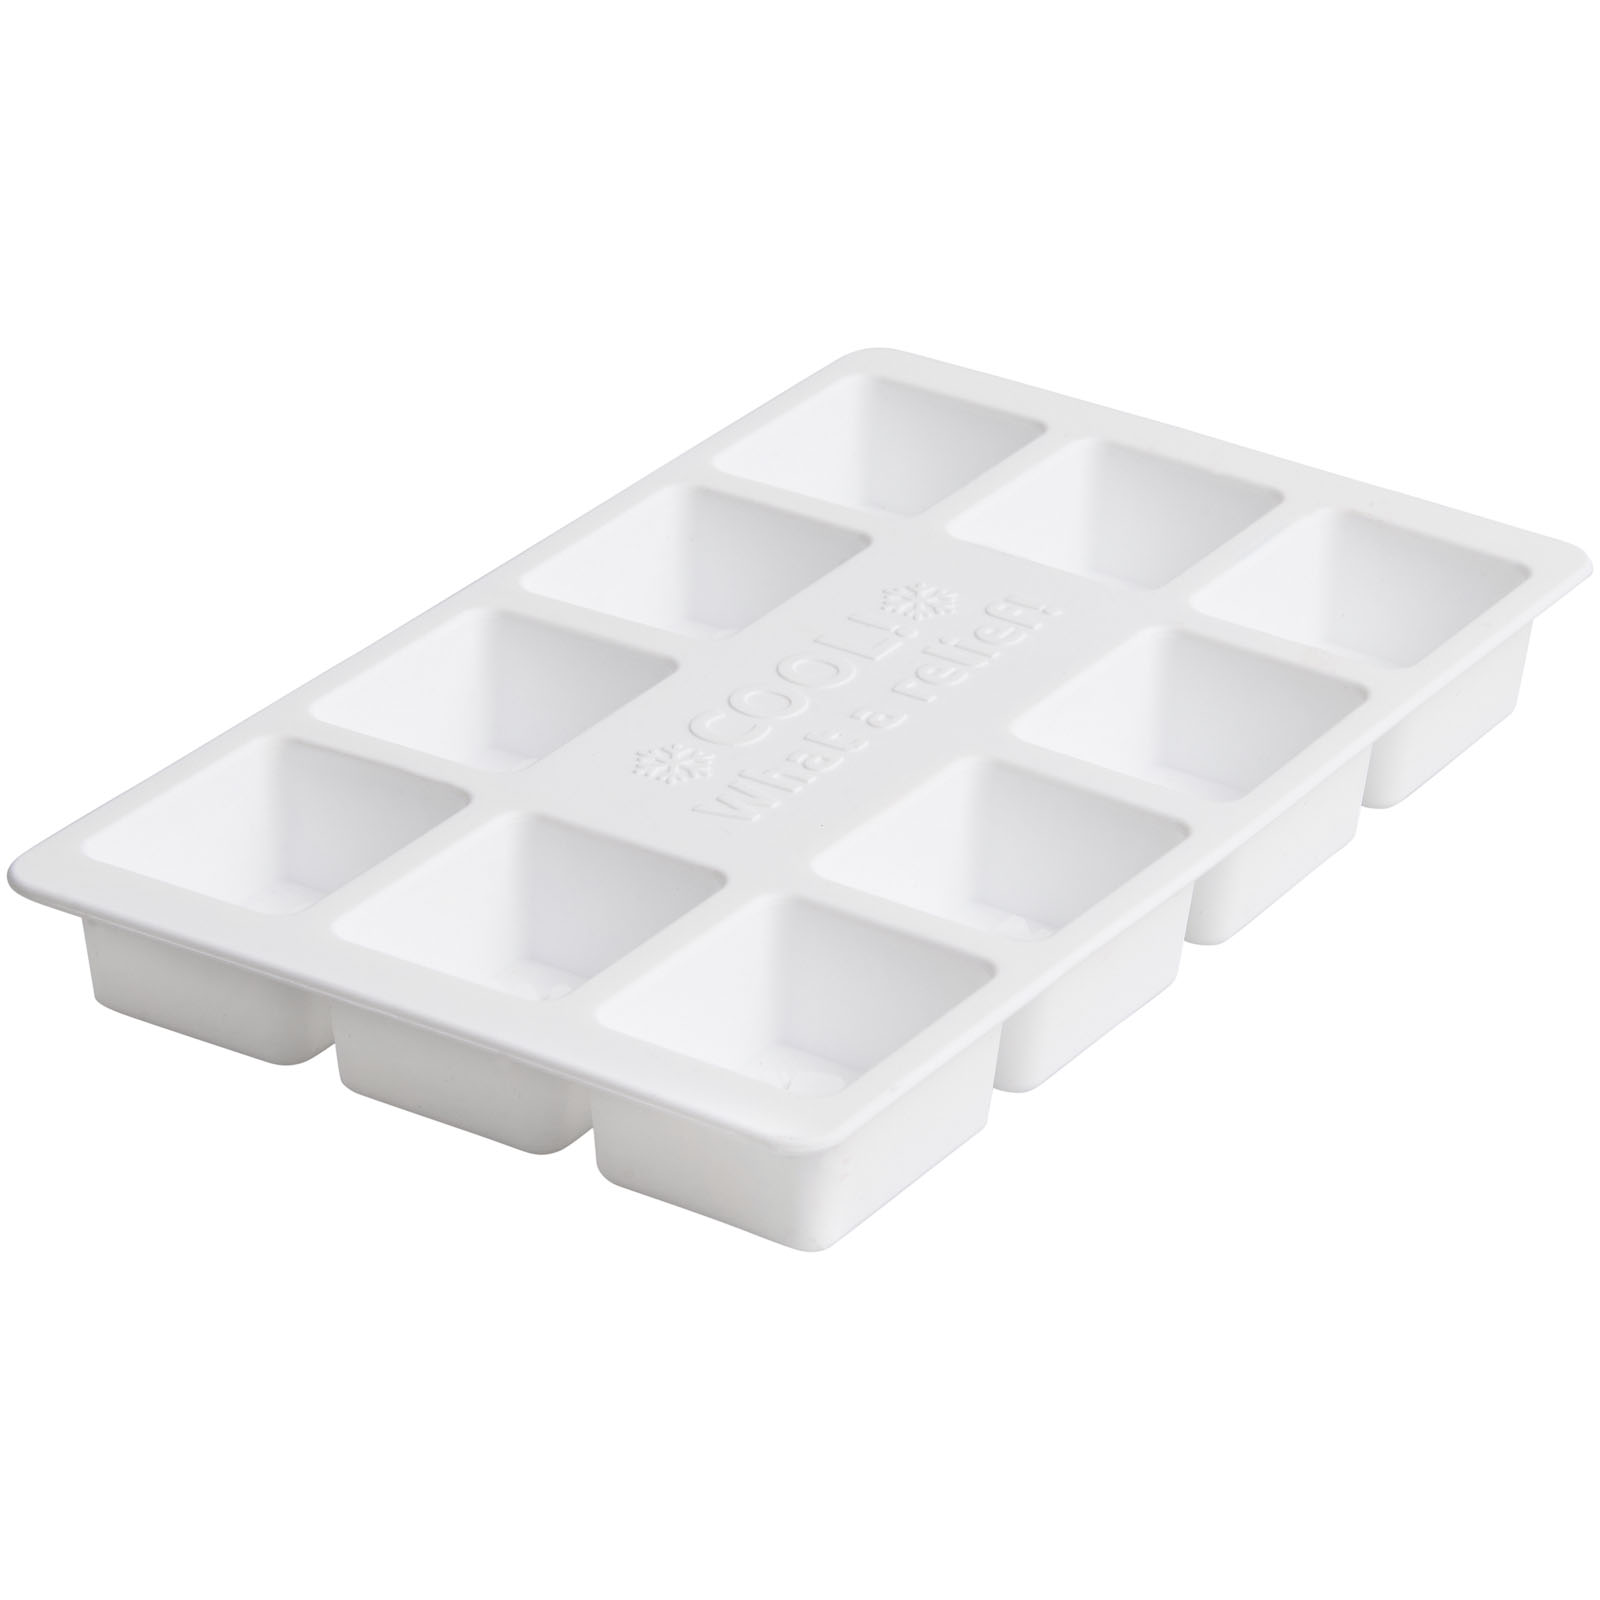 Advertising Kitchenware - Chill customisable ice cube tray